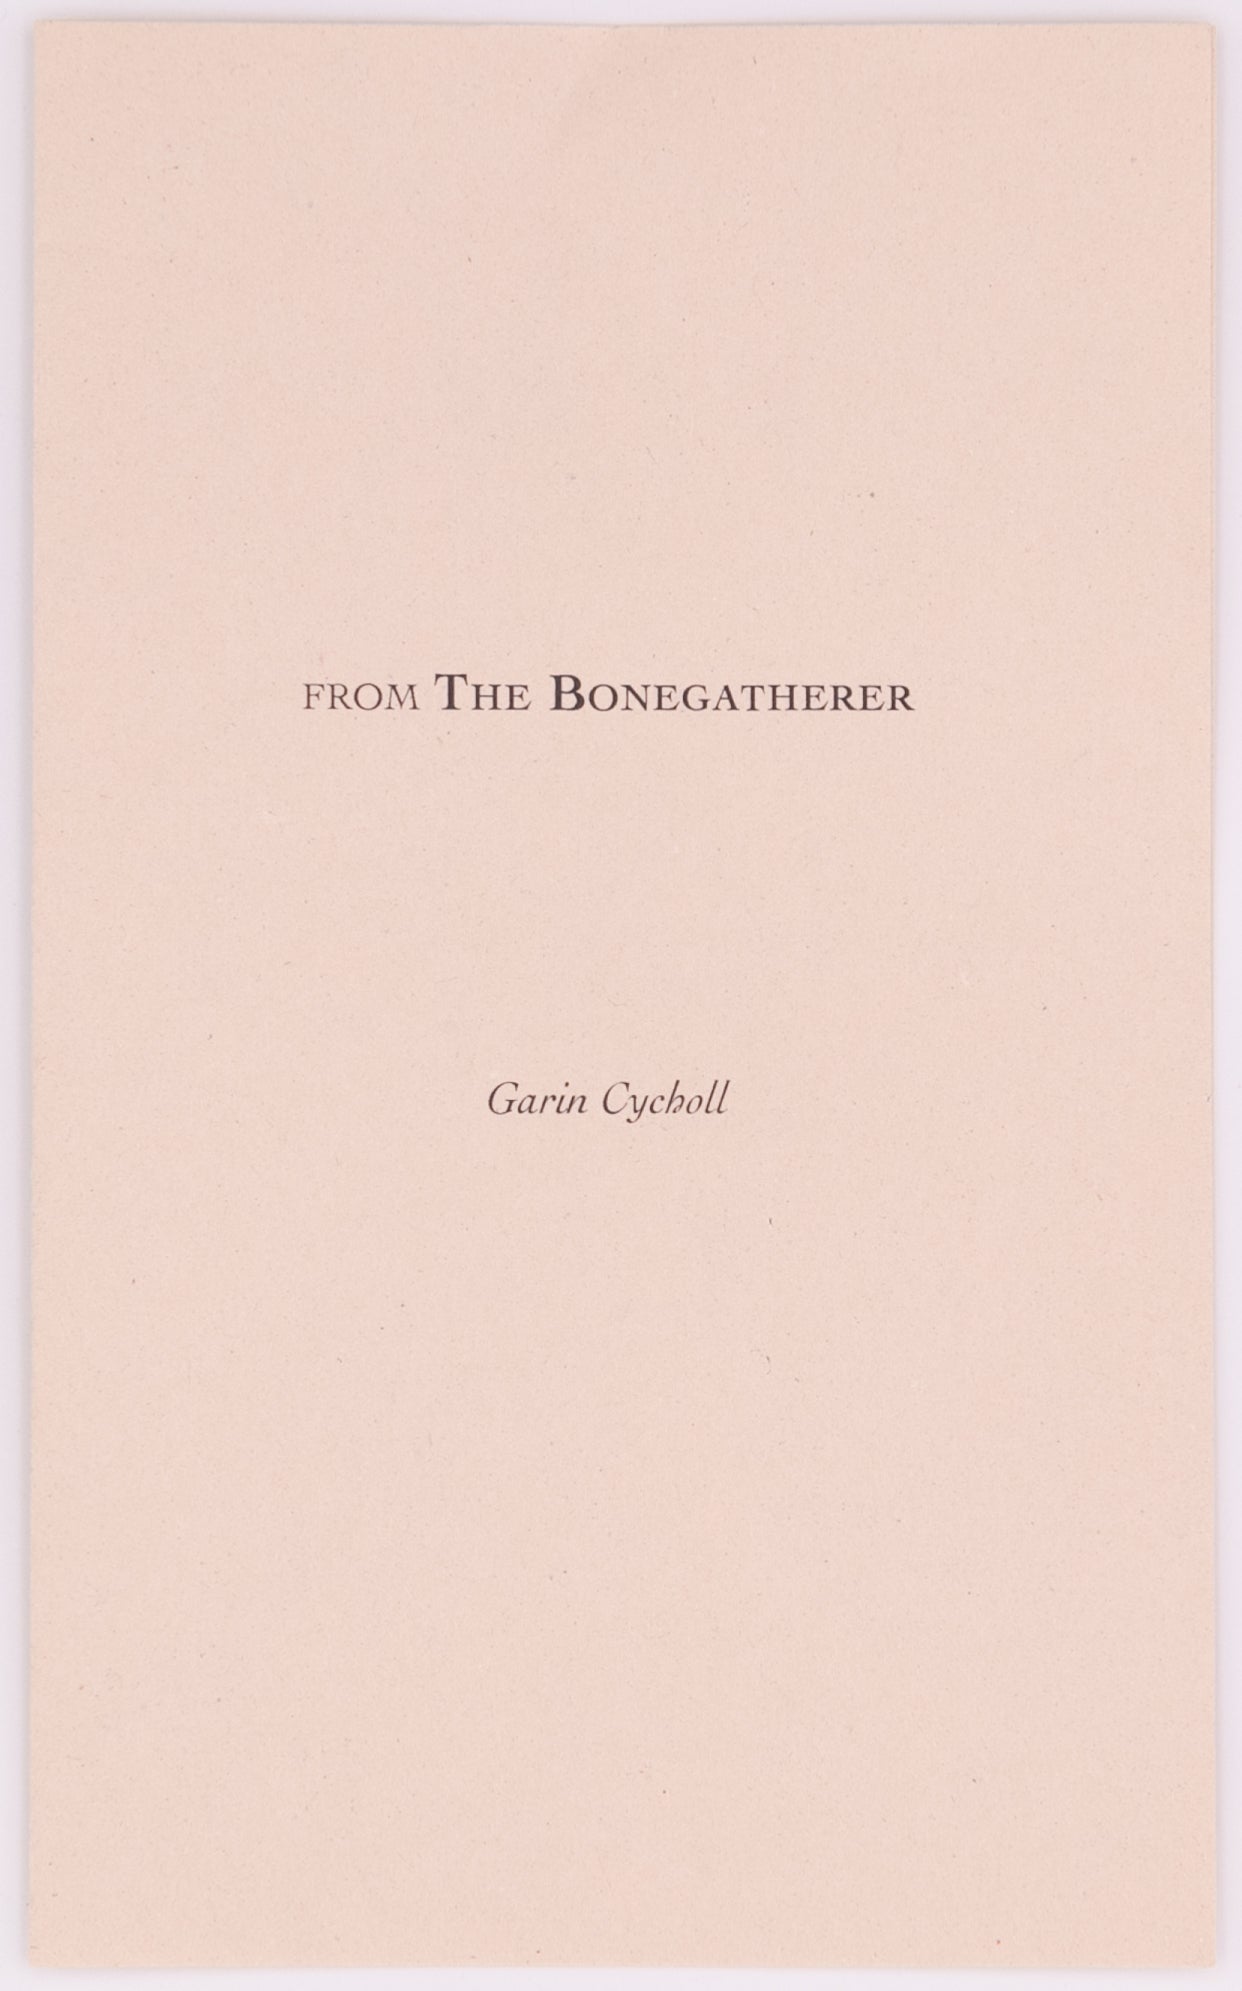 Cover of the broadside titled from the bonegatherer by Garin Cycholl. Black text on cream paper.